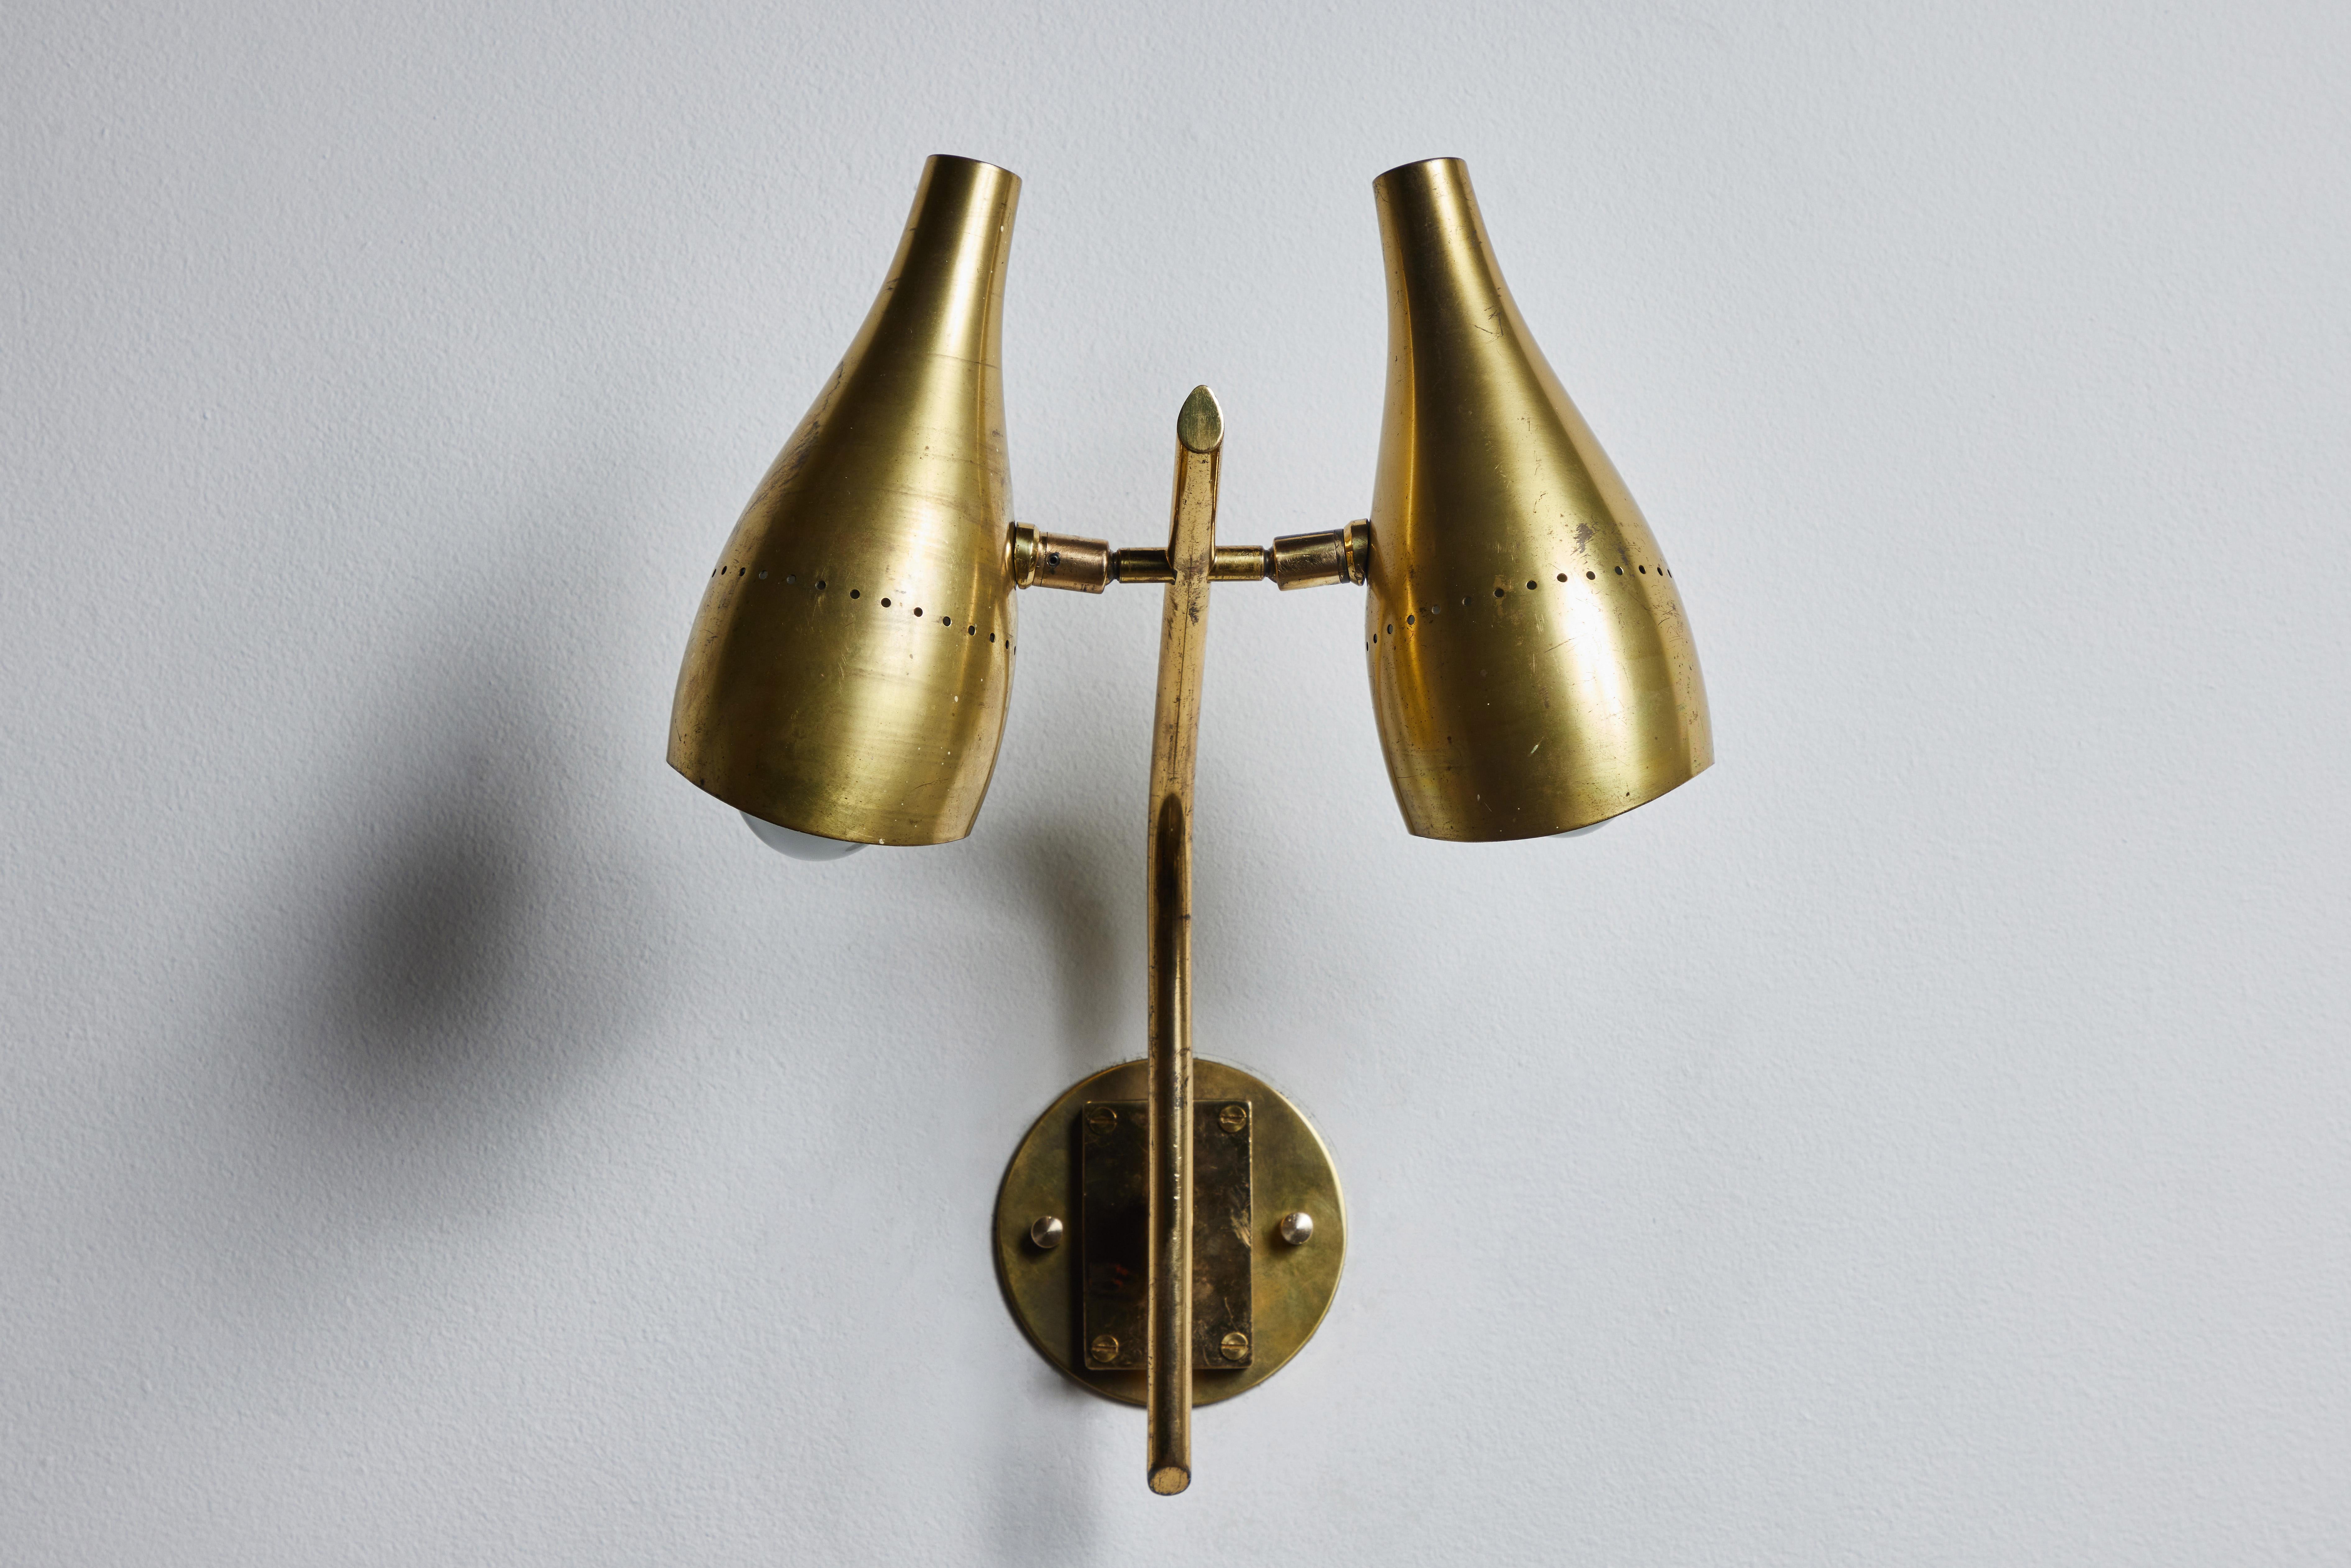 Mid-20th Century Double Shade Sconce by Lumen For Sale